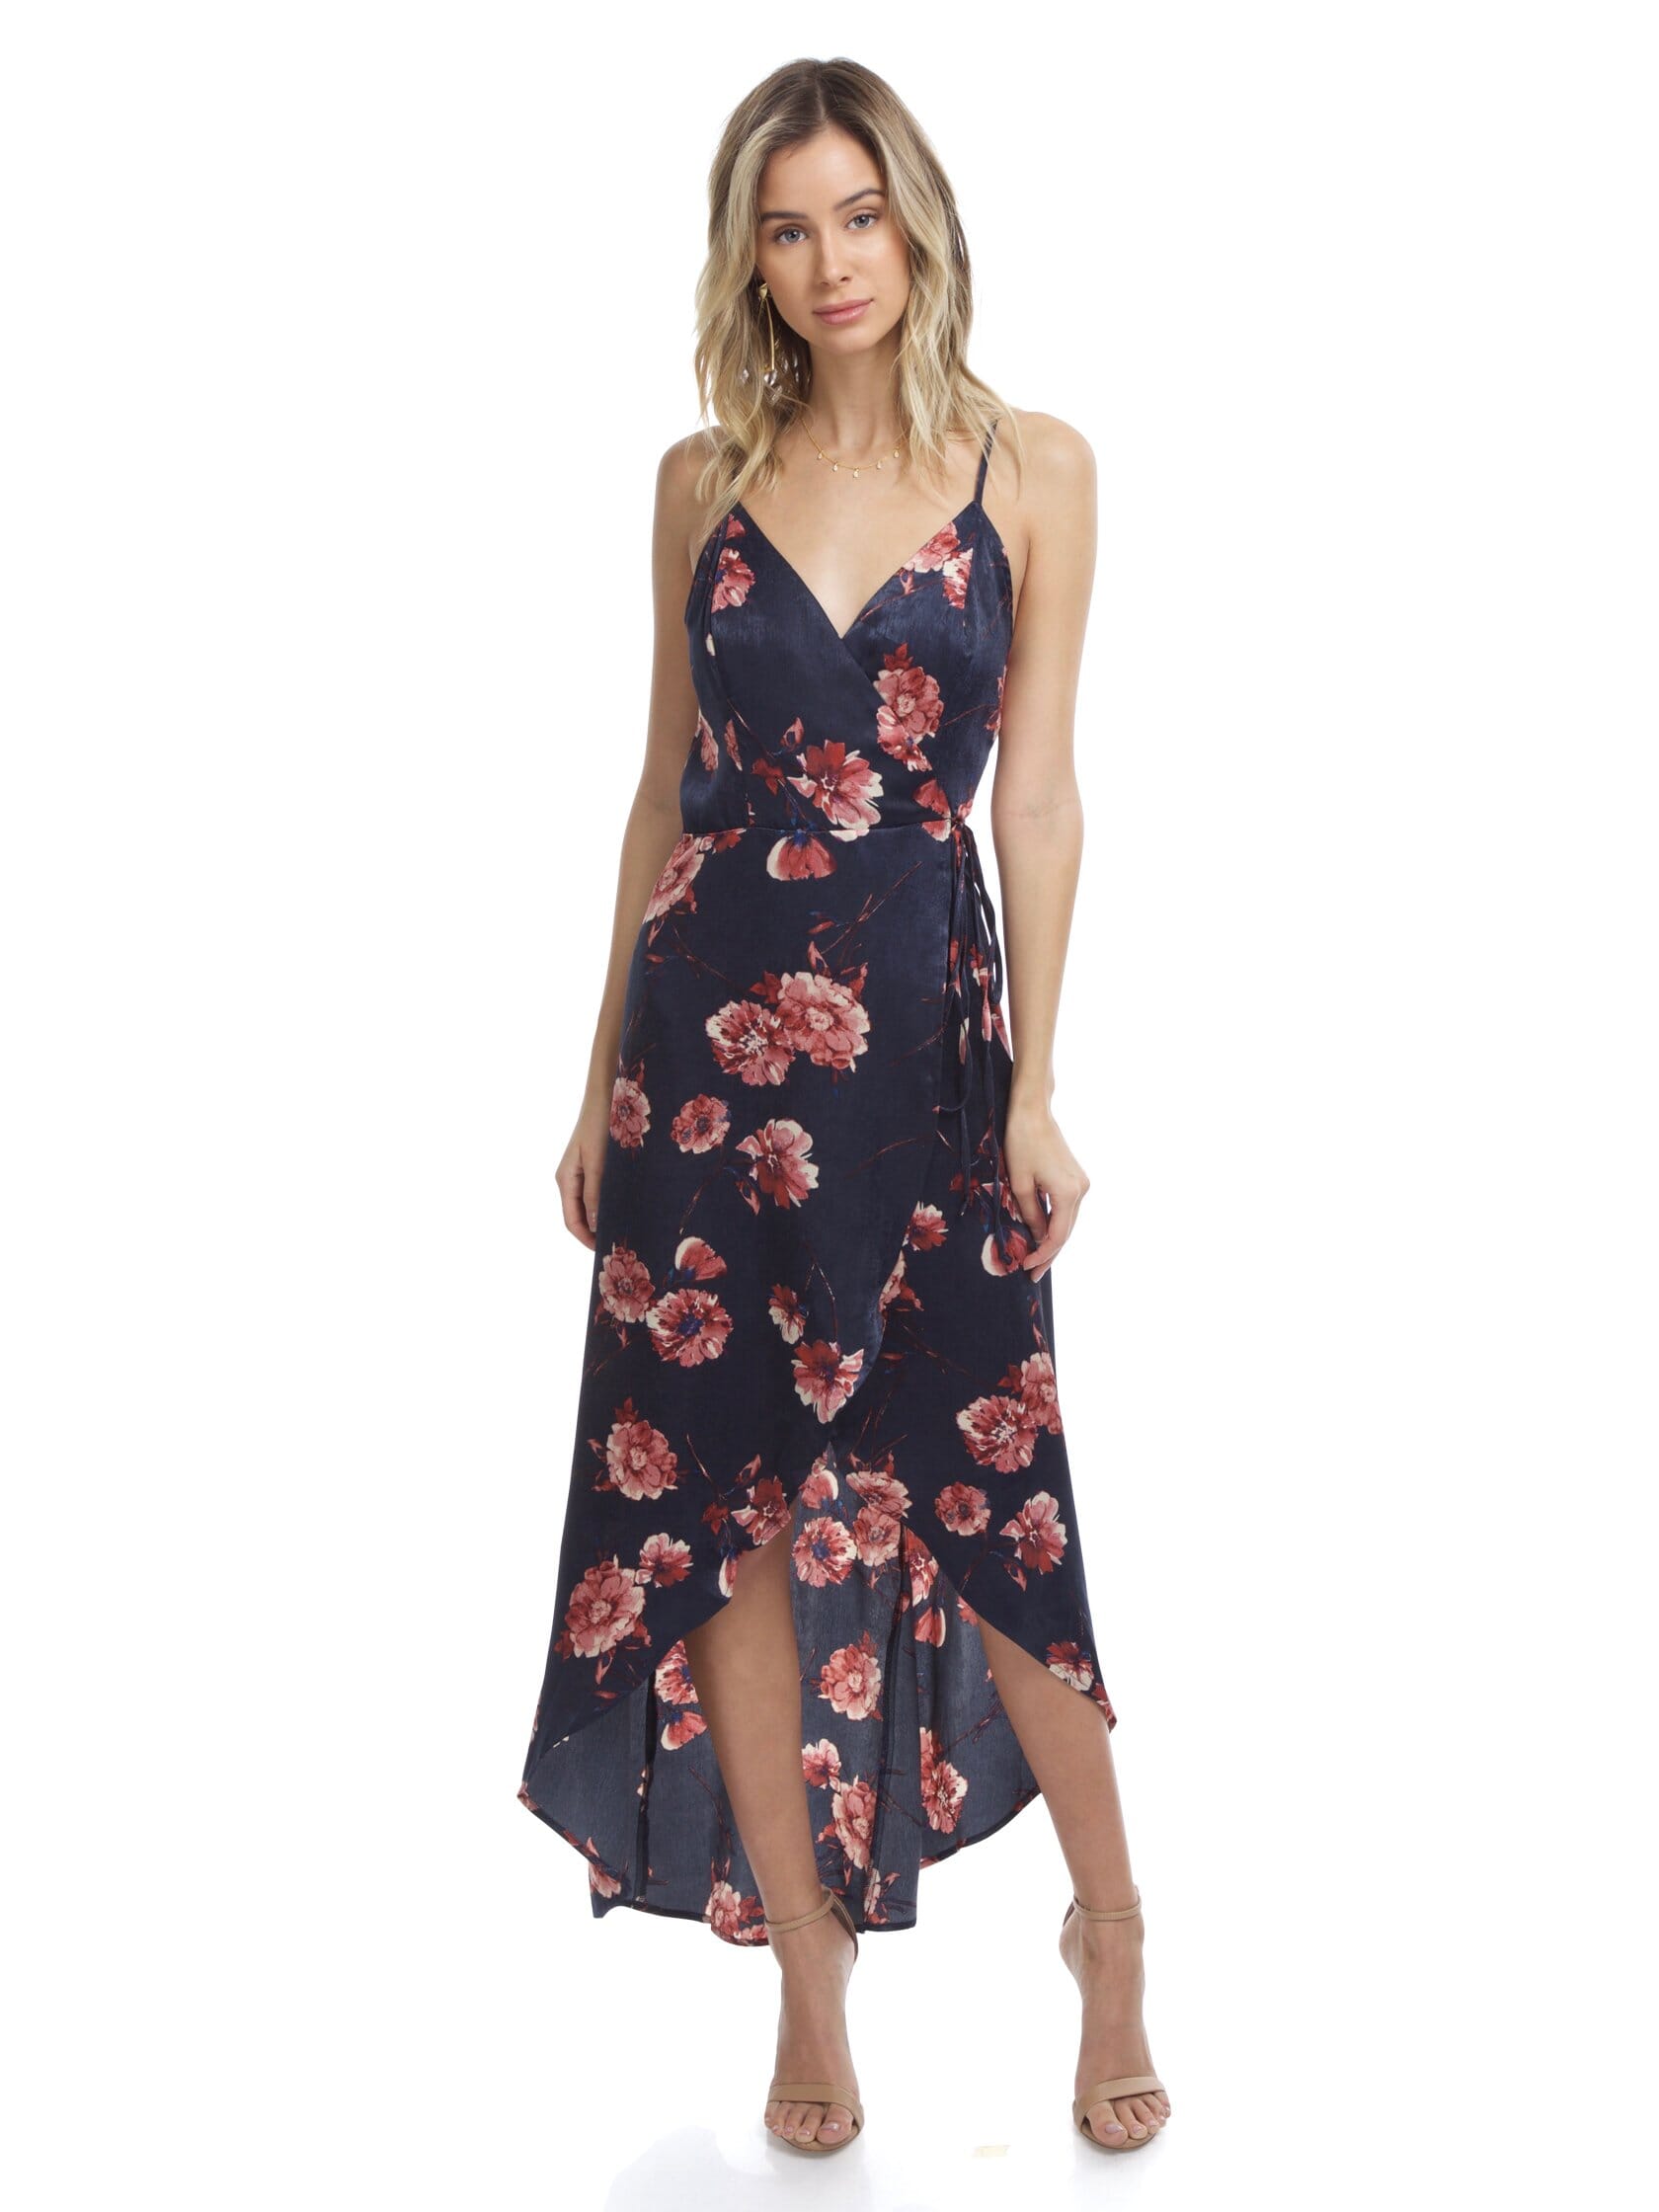 FashionPass Blossom Wrap Dress in Navy Floral